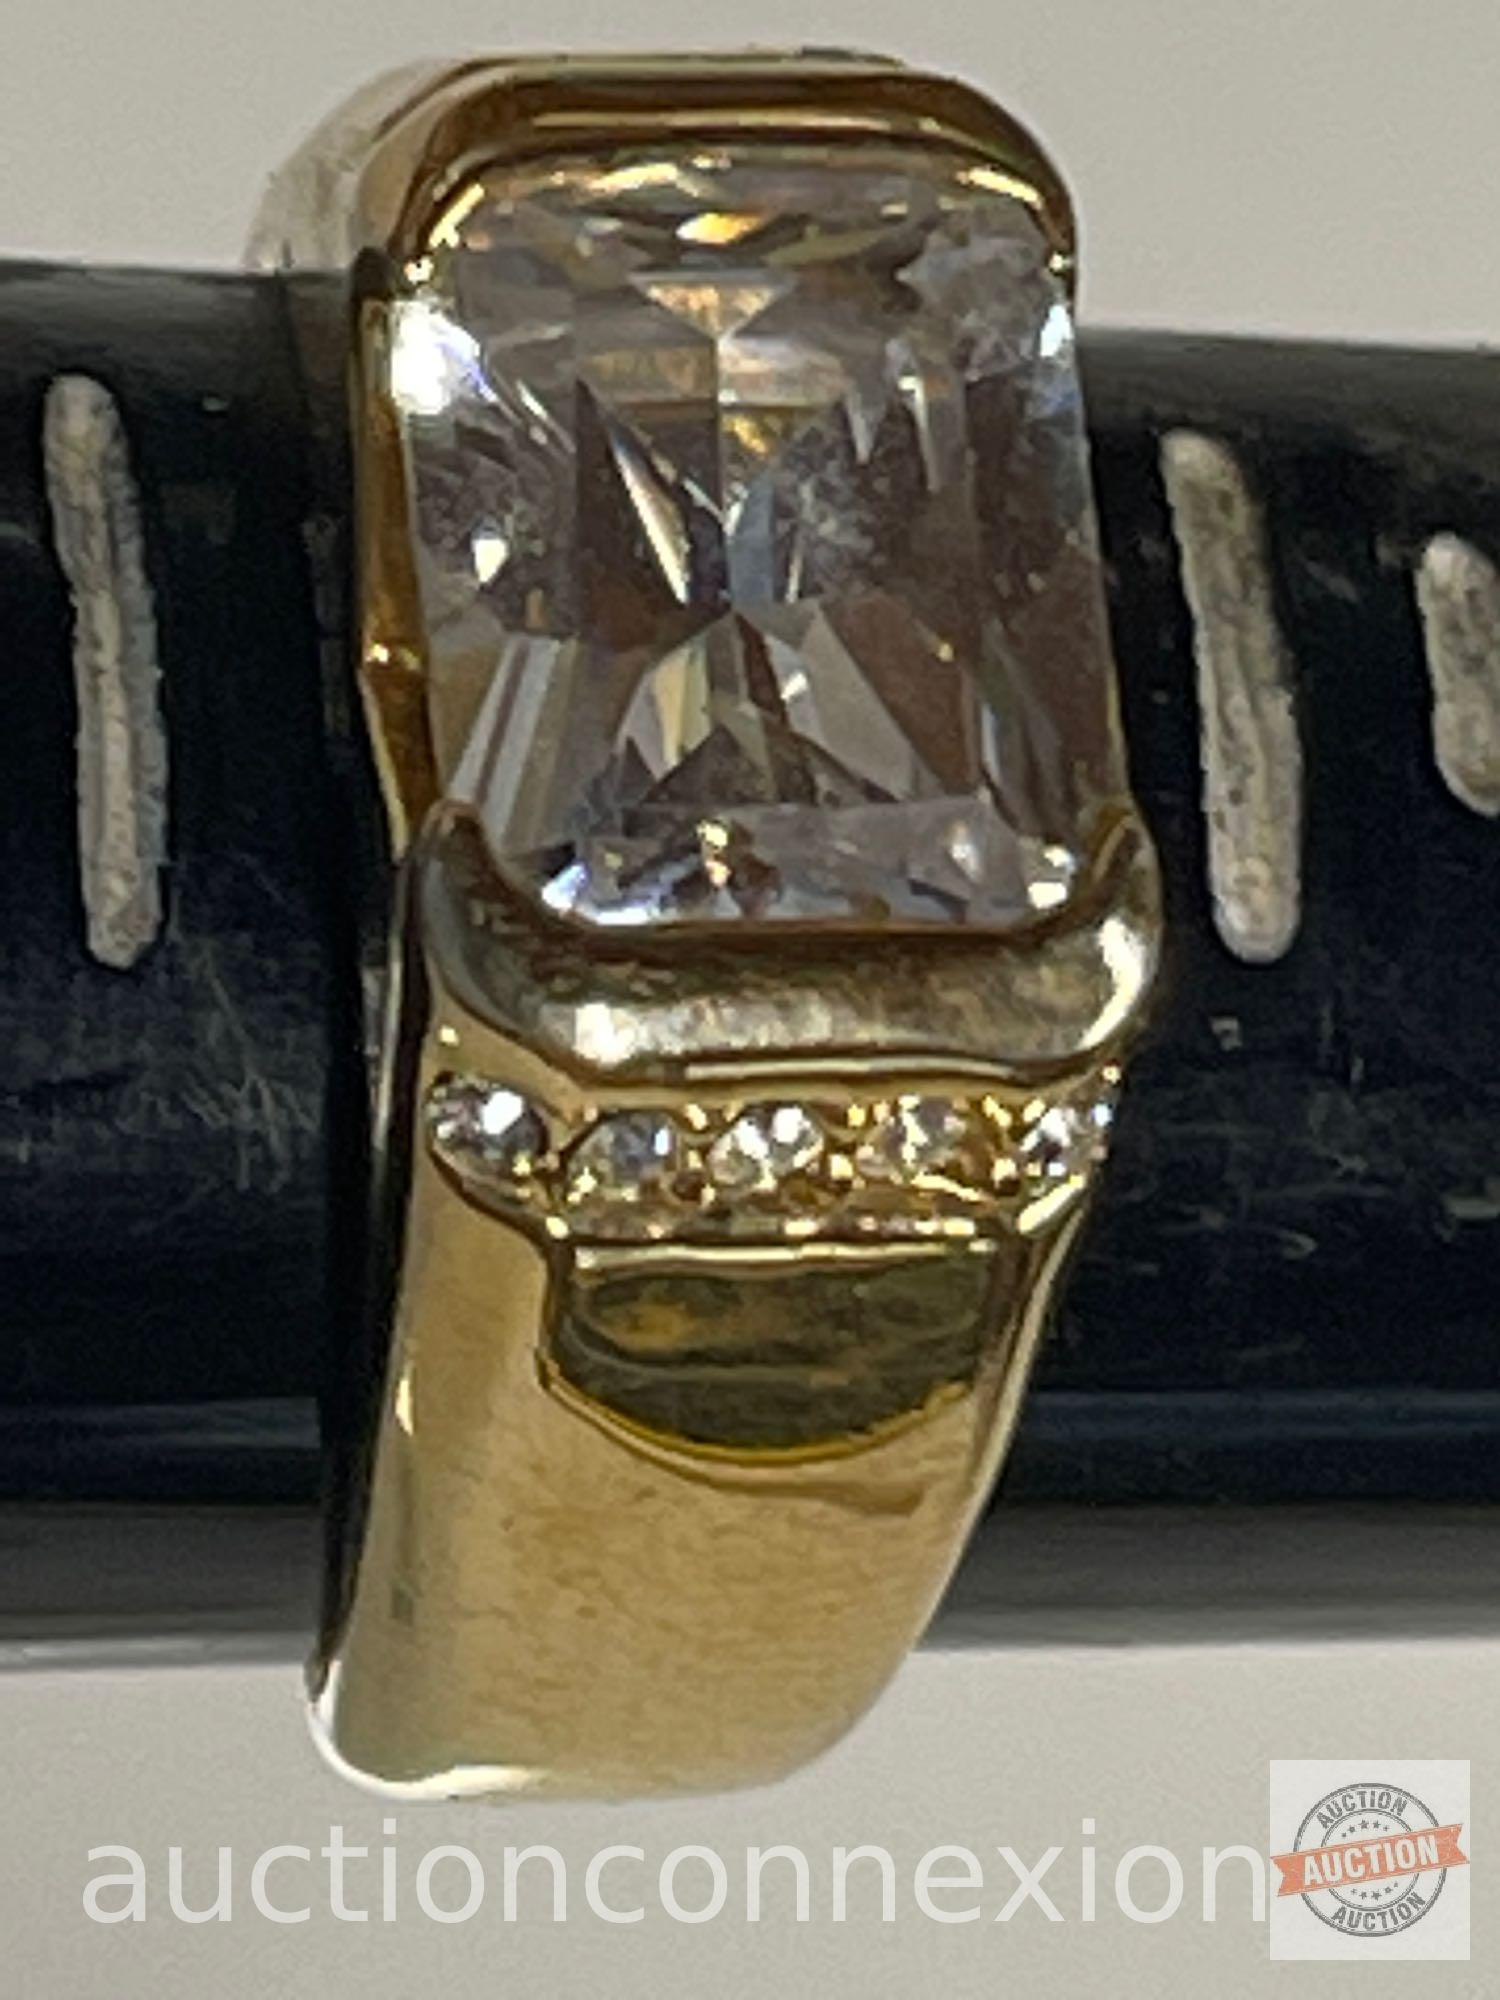 Jewelry - Fashion Cocktail Ring, 14k gold electroplated cubic zirconia, Single clear emerald cut